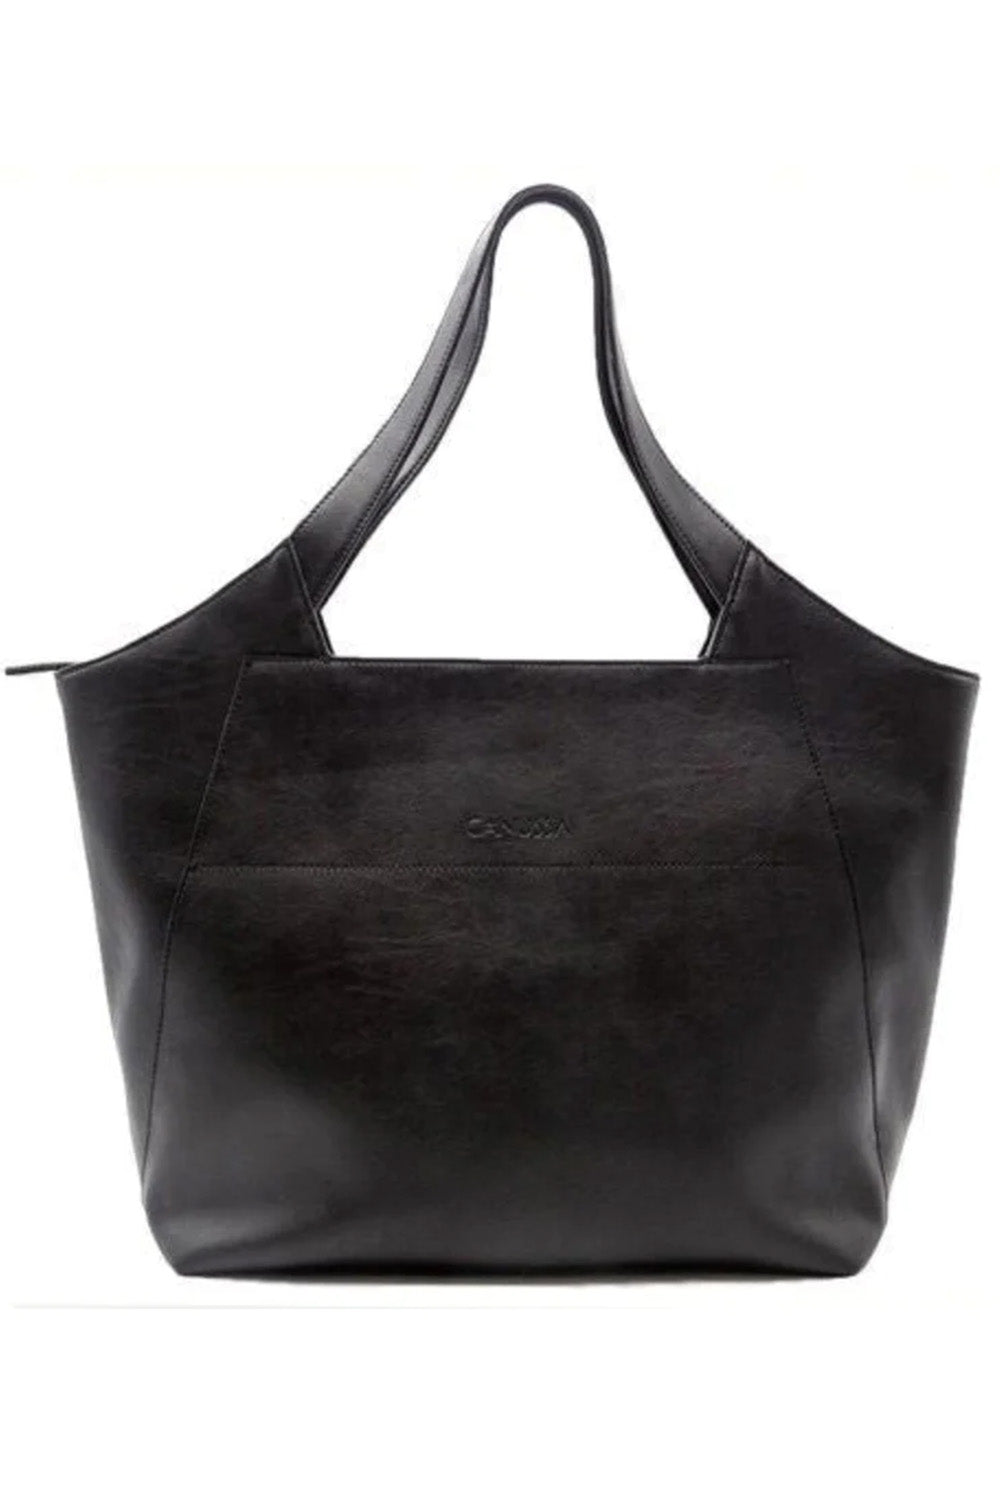 Executive Black - The bag for business women